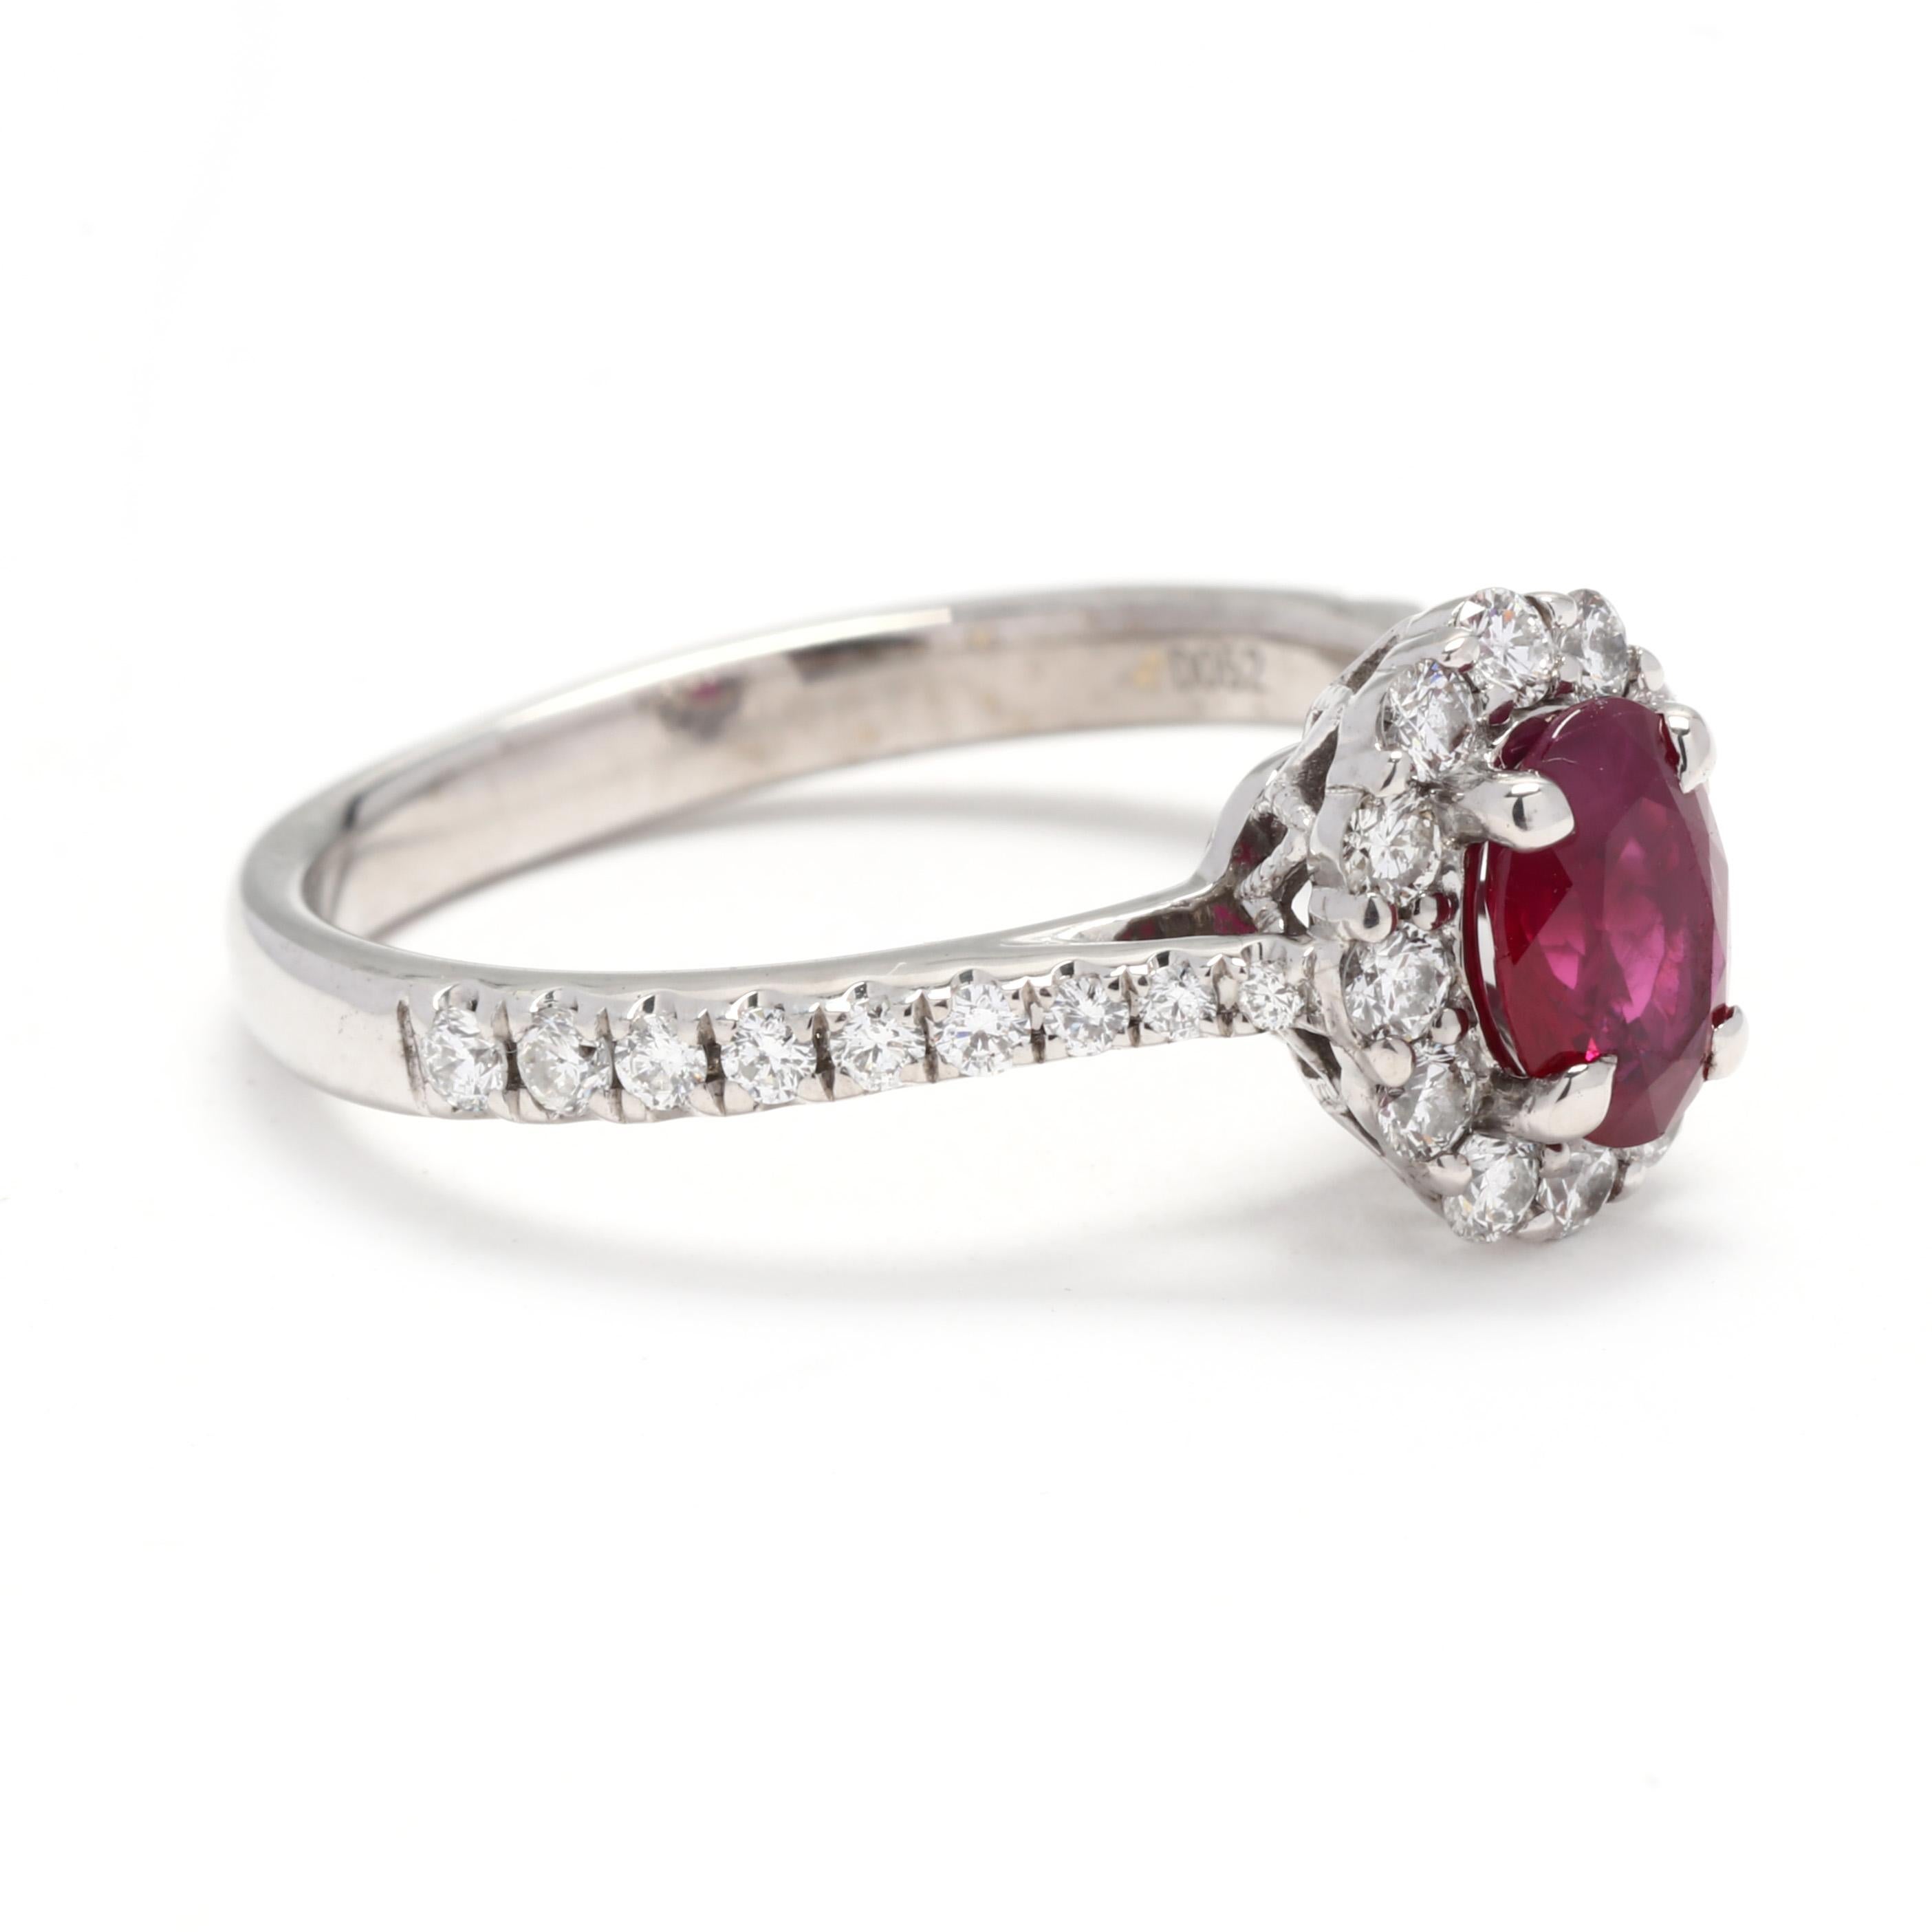 A 14 karat white gold natural ruby and diamond halo engagement ring. This July birthstone ring features a prong set, oval cut ruby weighing approximately 1.1 carat surrounded by a halo of round brilliant cut diamonds and down the band weighing